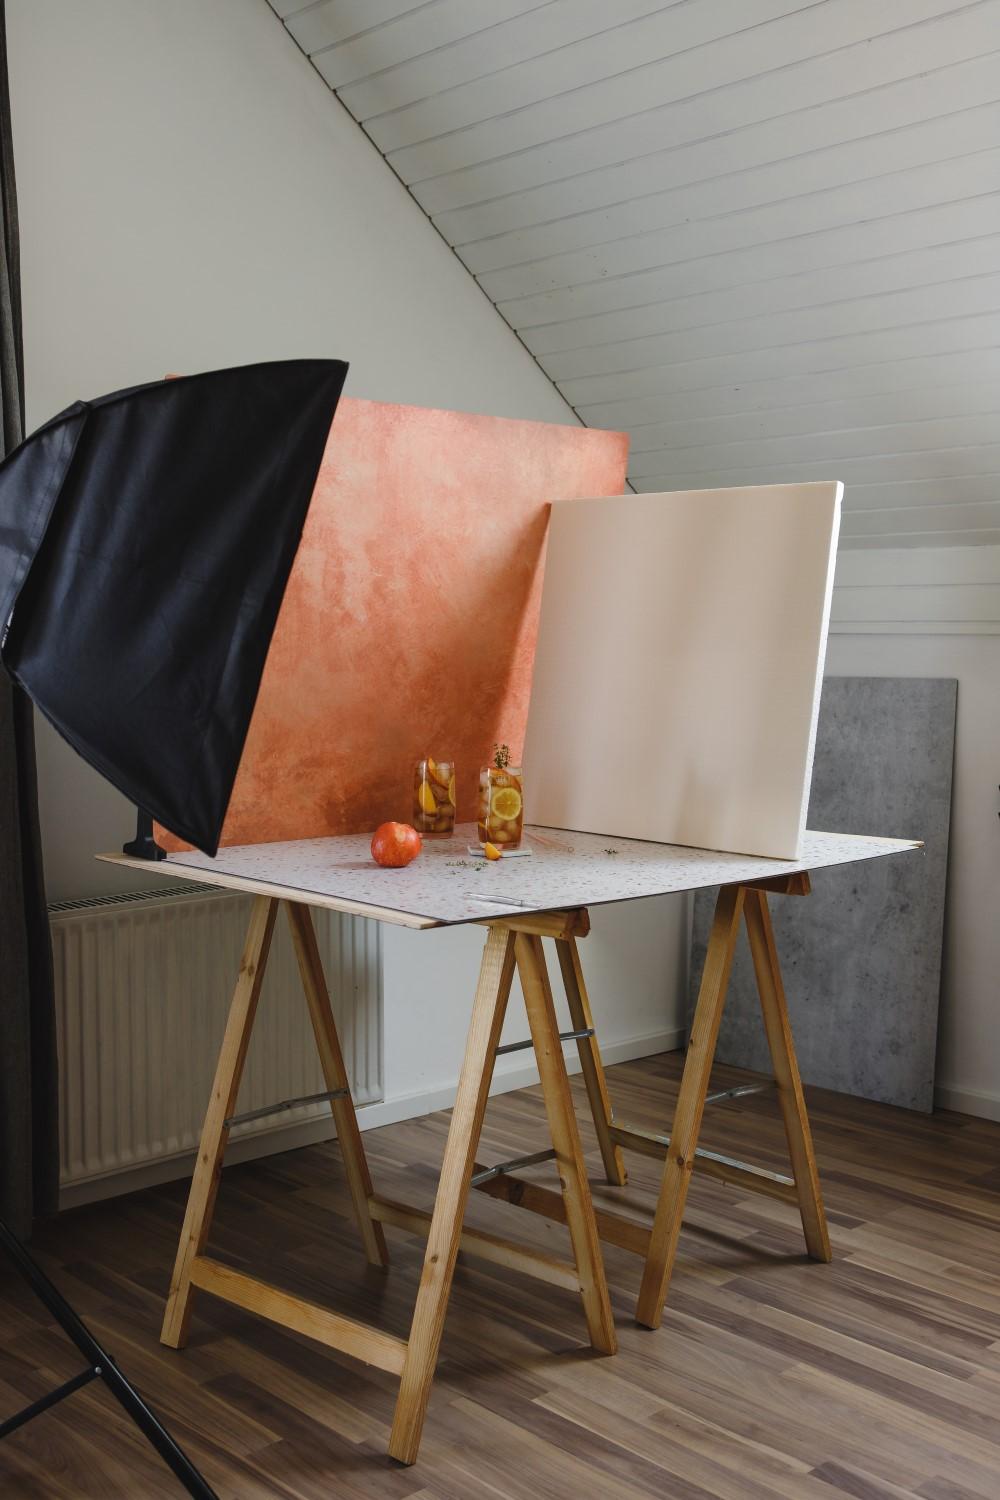 Curious about photography backdrops and how to mix them in your food photography work? There are a number of ways you can mix and match backdrops and I hope my ideas will give you a creative boost for your work!